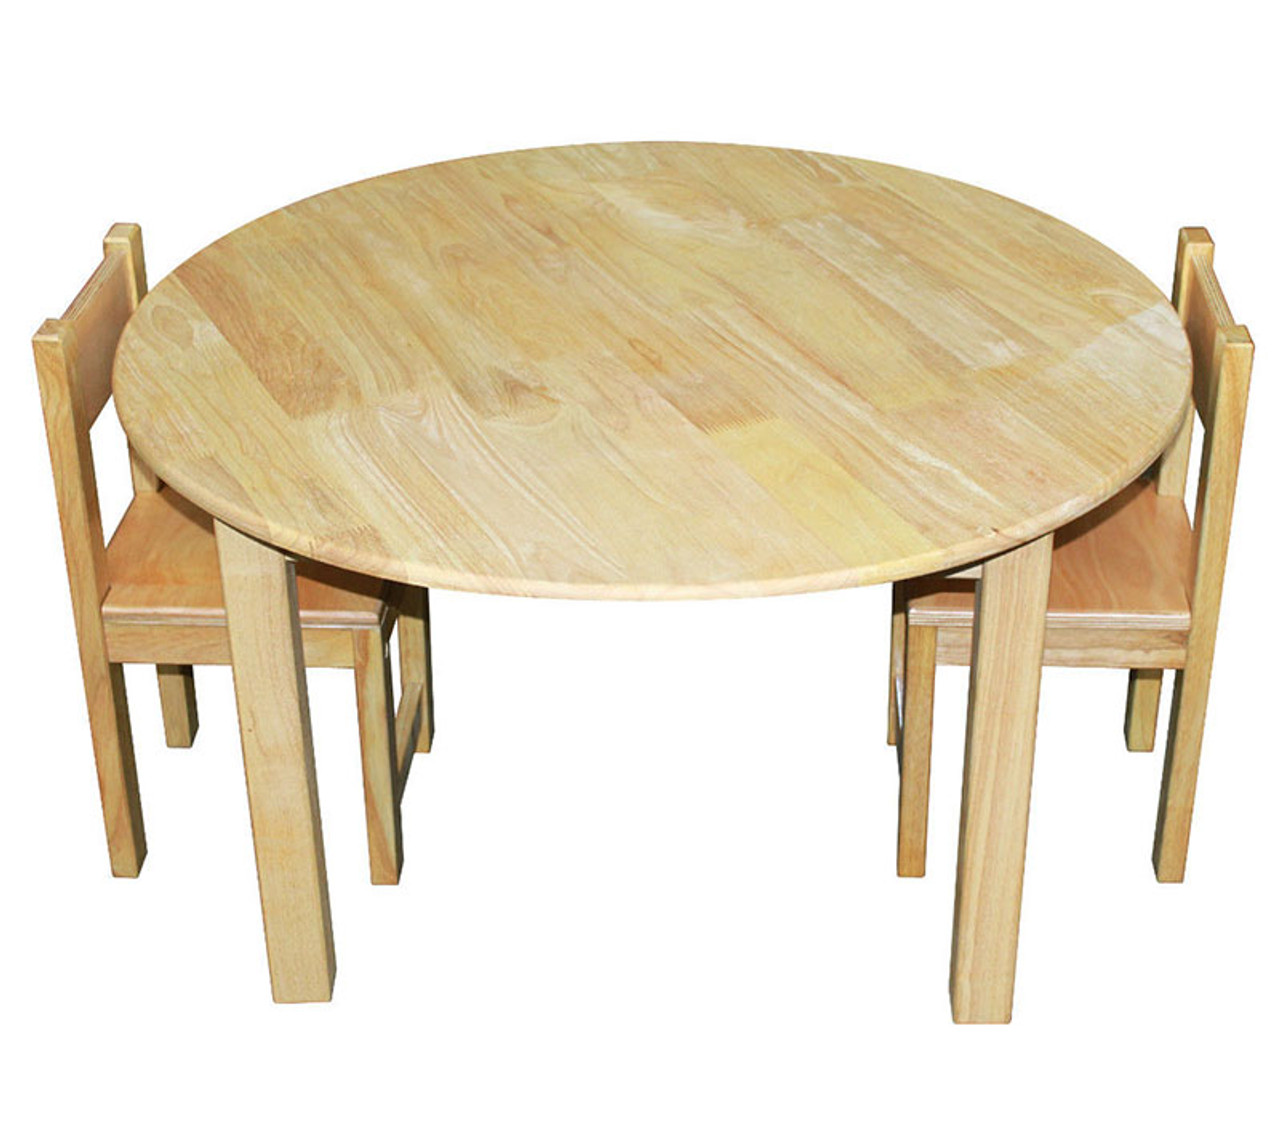 Qtoys Round Wooden Kids Table Cheapest Prices Online